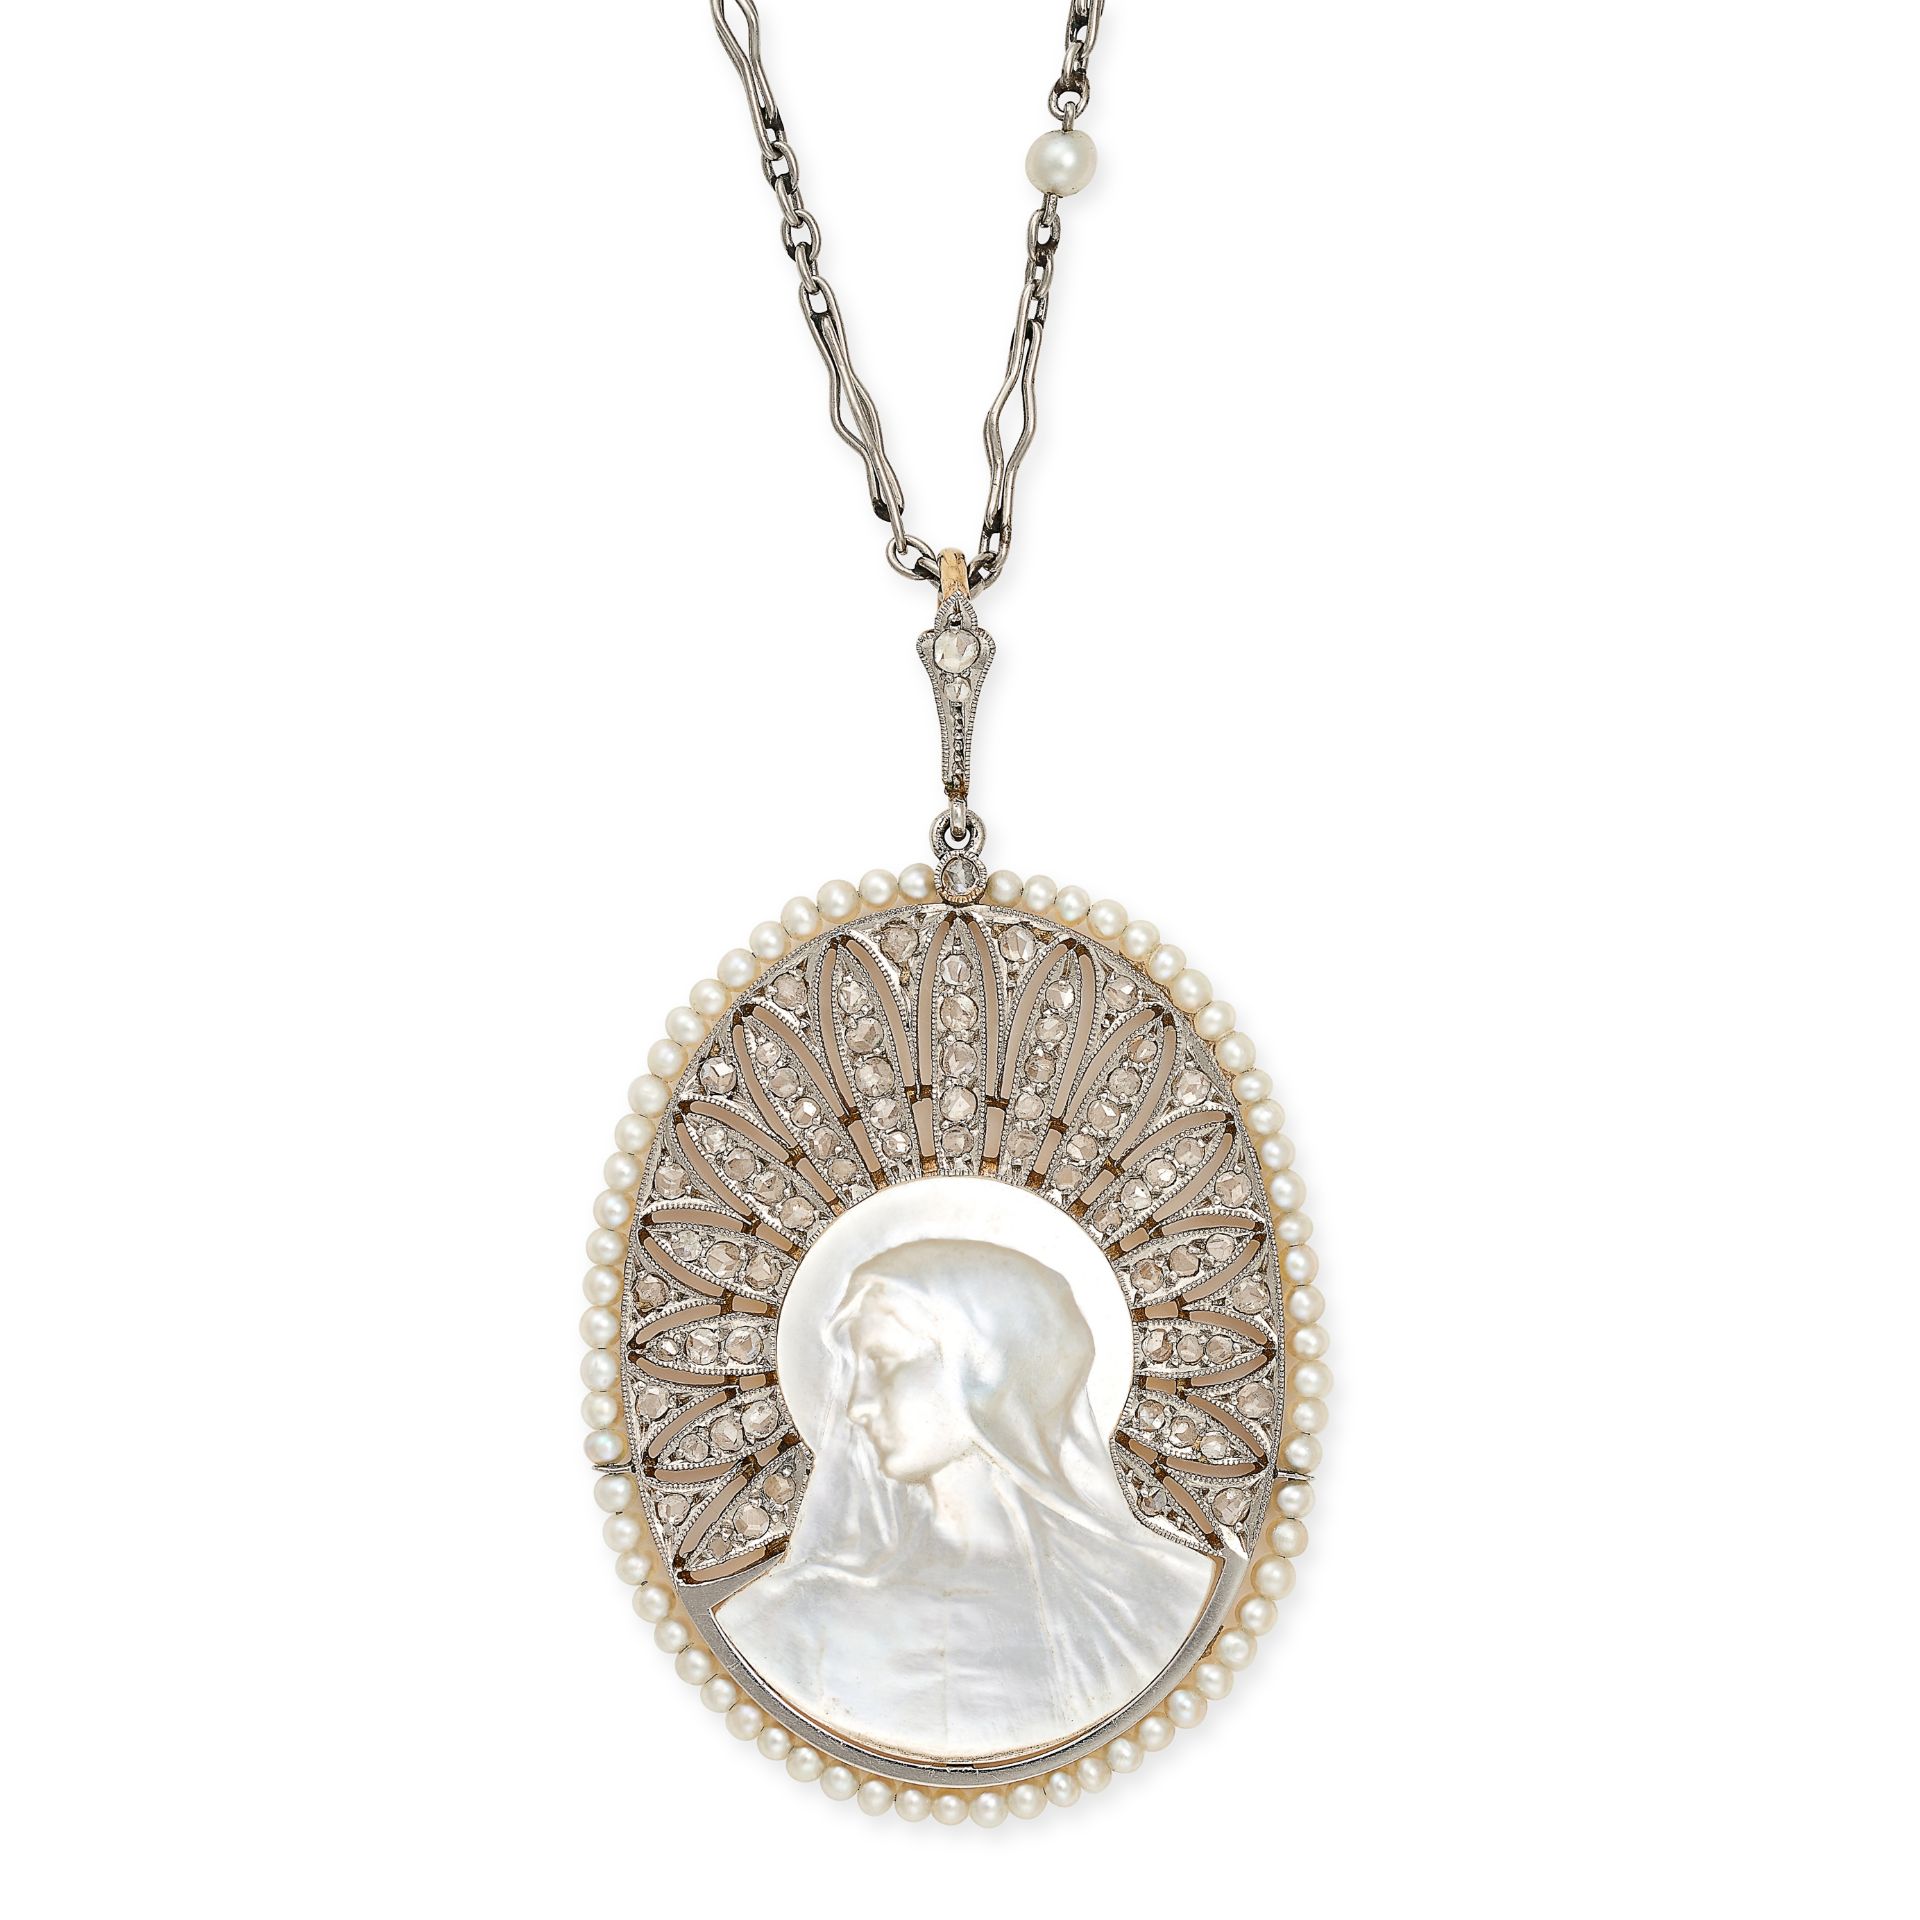 A MOTHER OF PEARL, PEARL AND DIAMOND MADONNA PENDANT NECKLACE set with a central carved mother of...